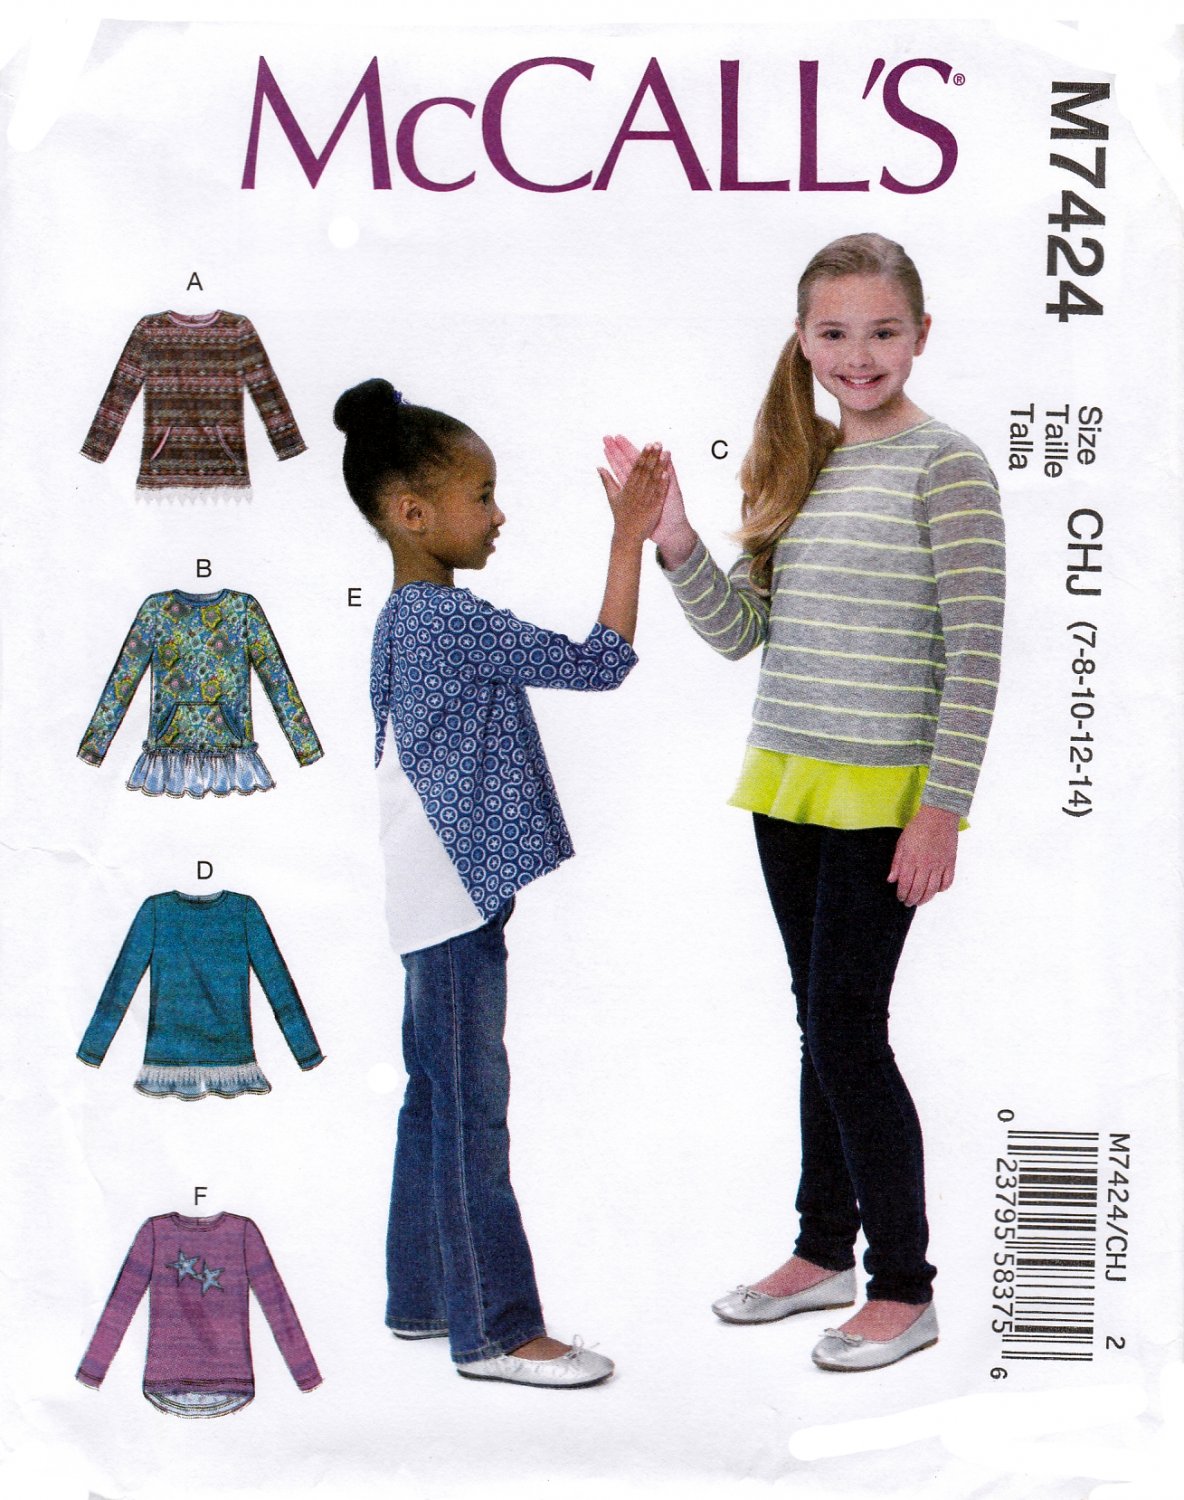 McCall's 7424 Girls Tops Pullover Sleeve Hemline Variations Sewing Pattern Sizes 7-8-10-12-14